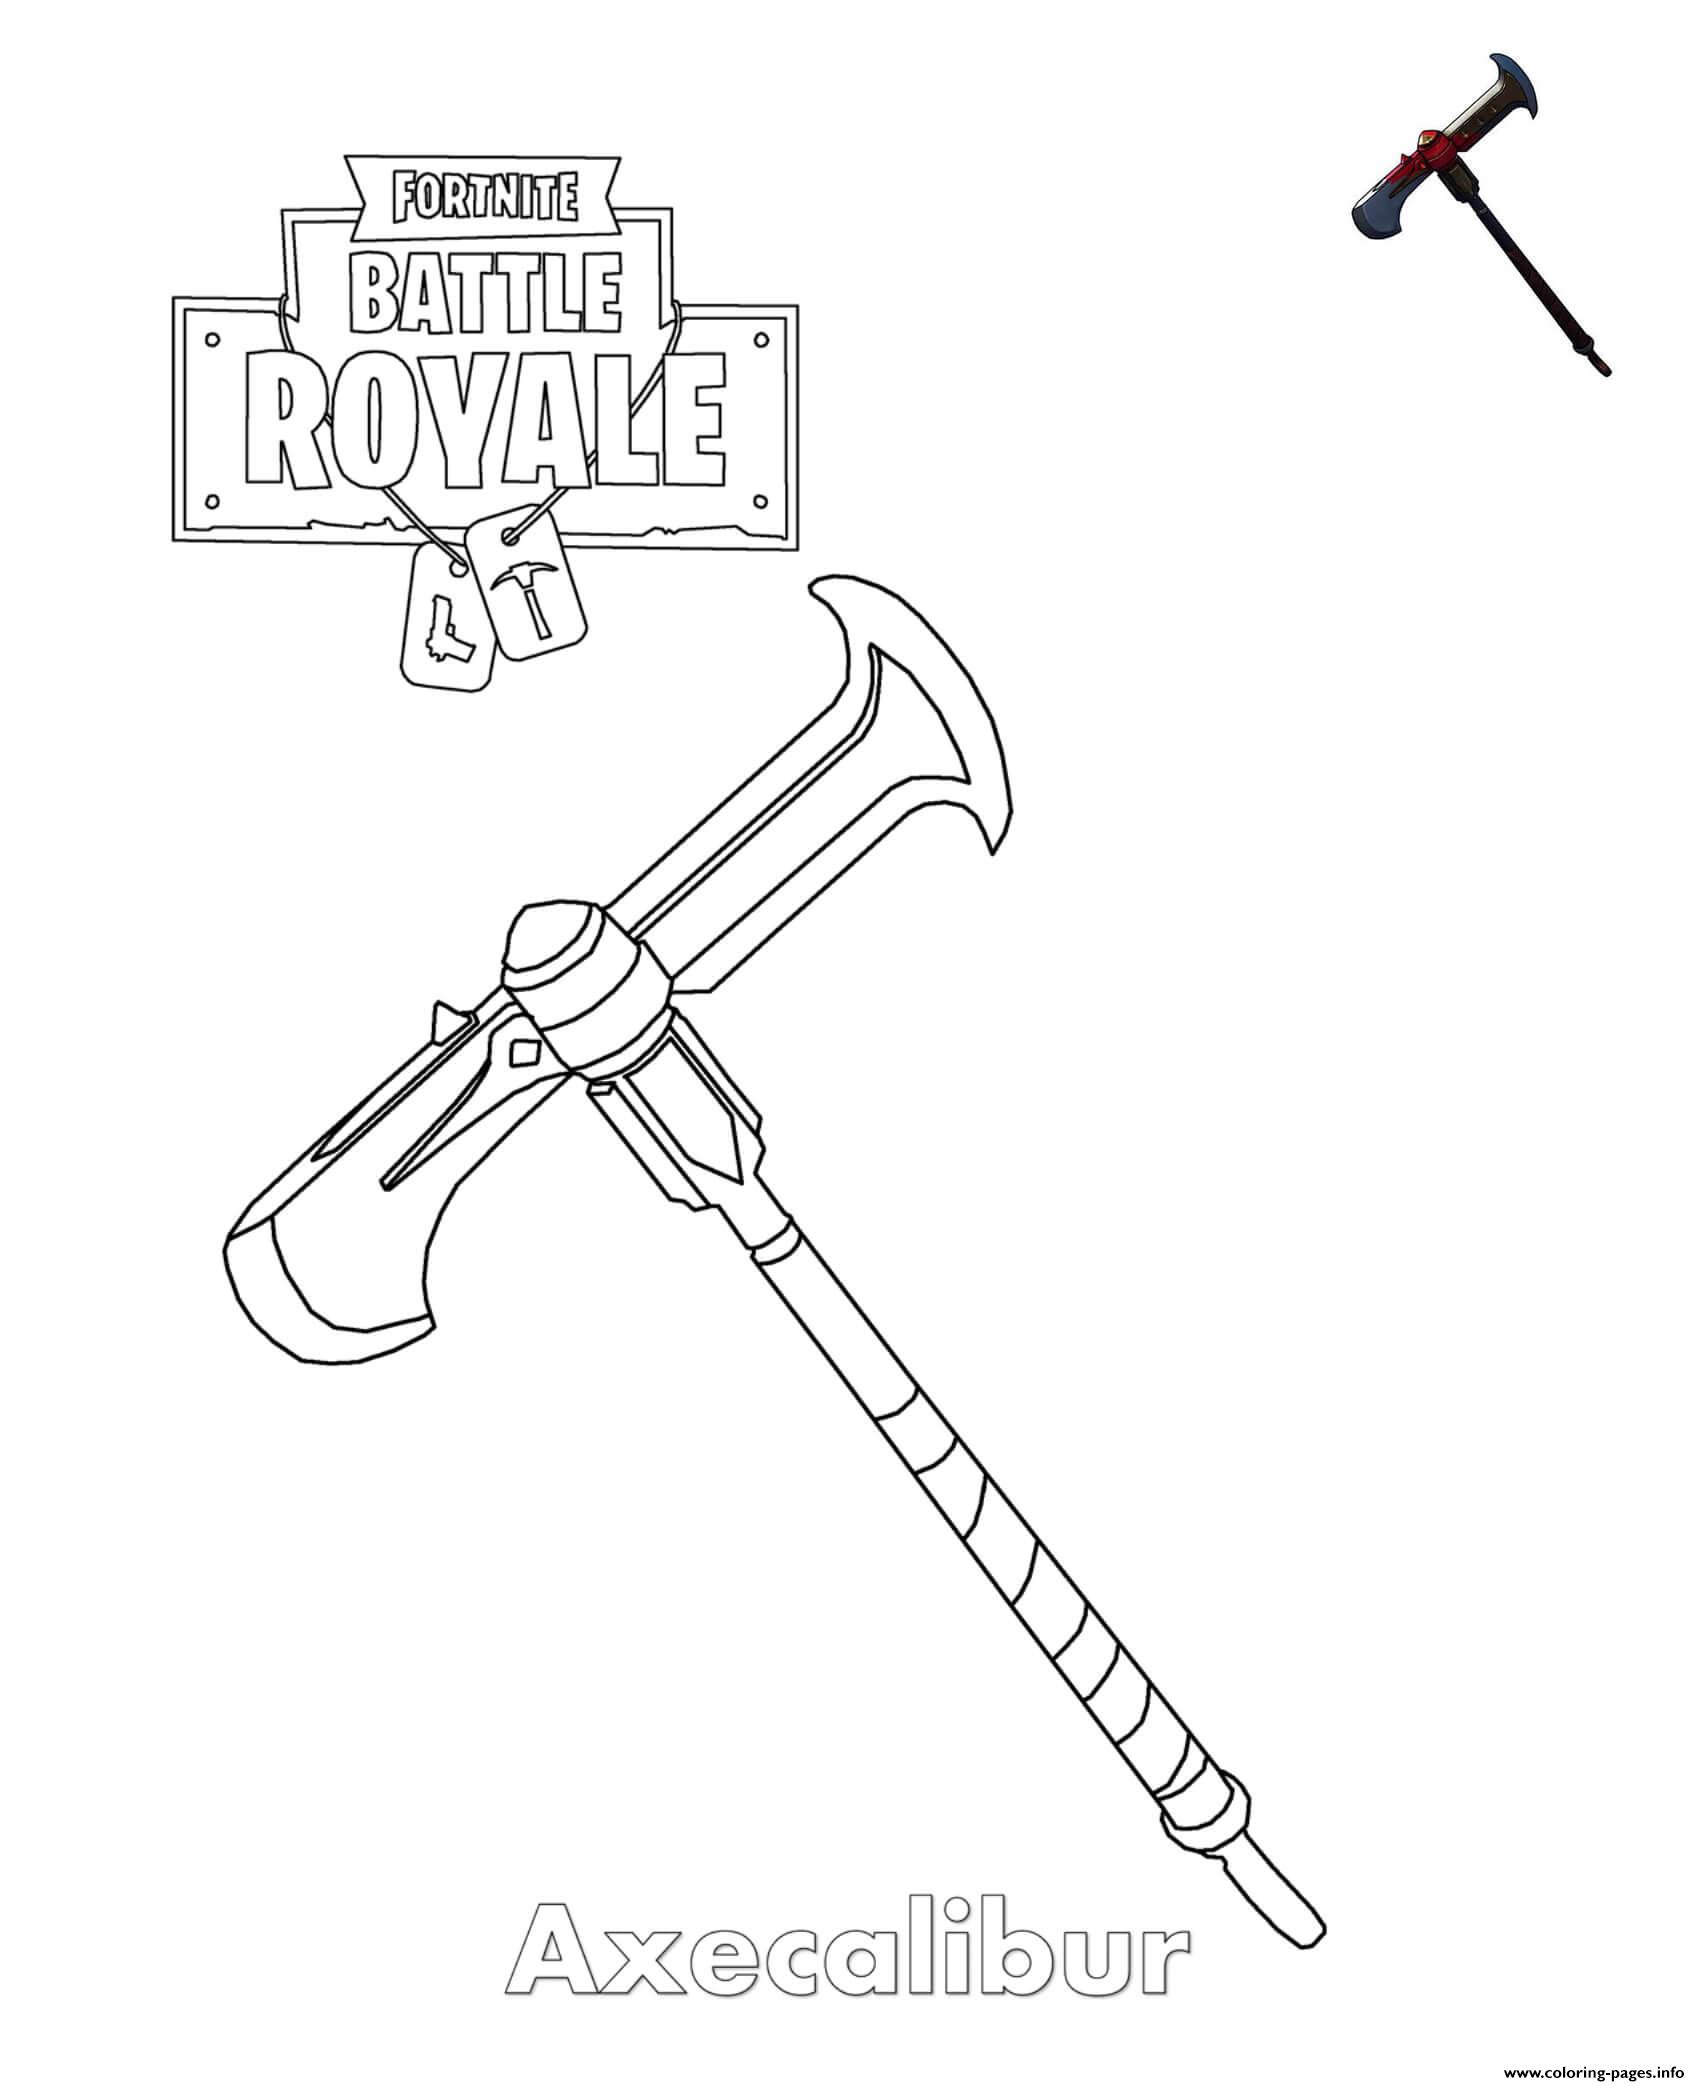 Axecalibur Fortnite Item Coloring Pages Printable